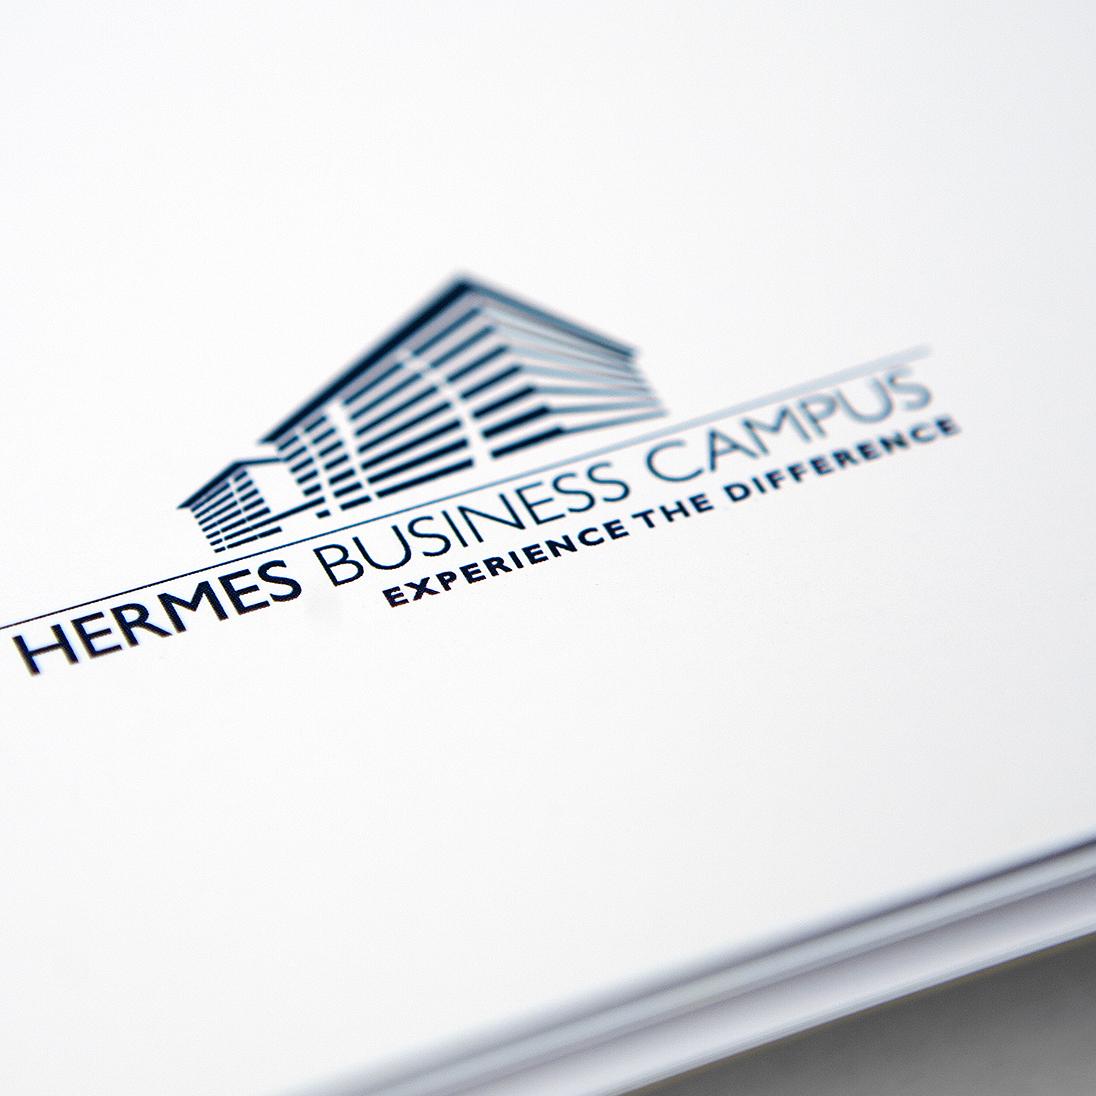 Atenor - Hermes Business Campus